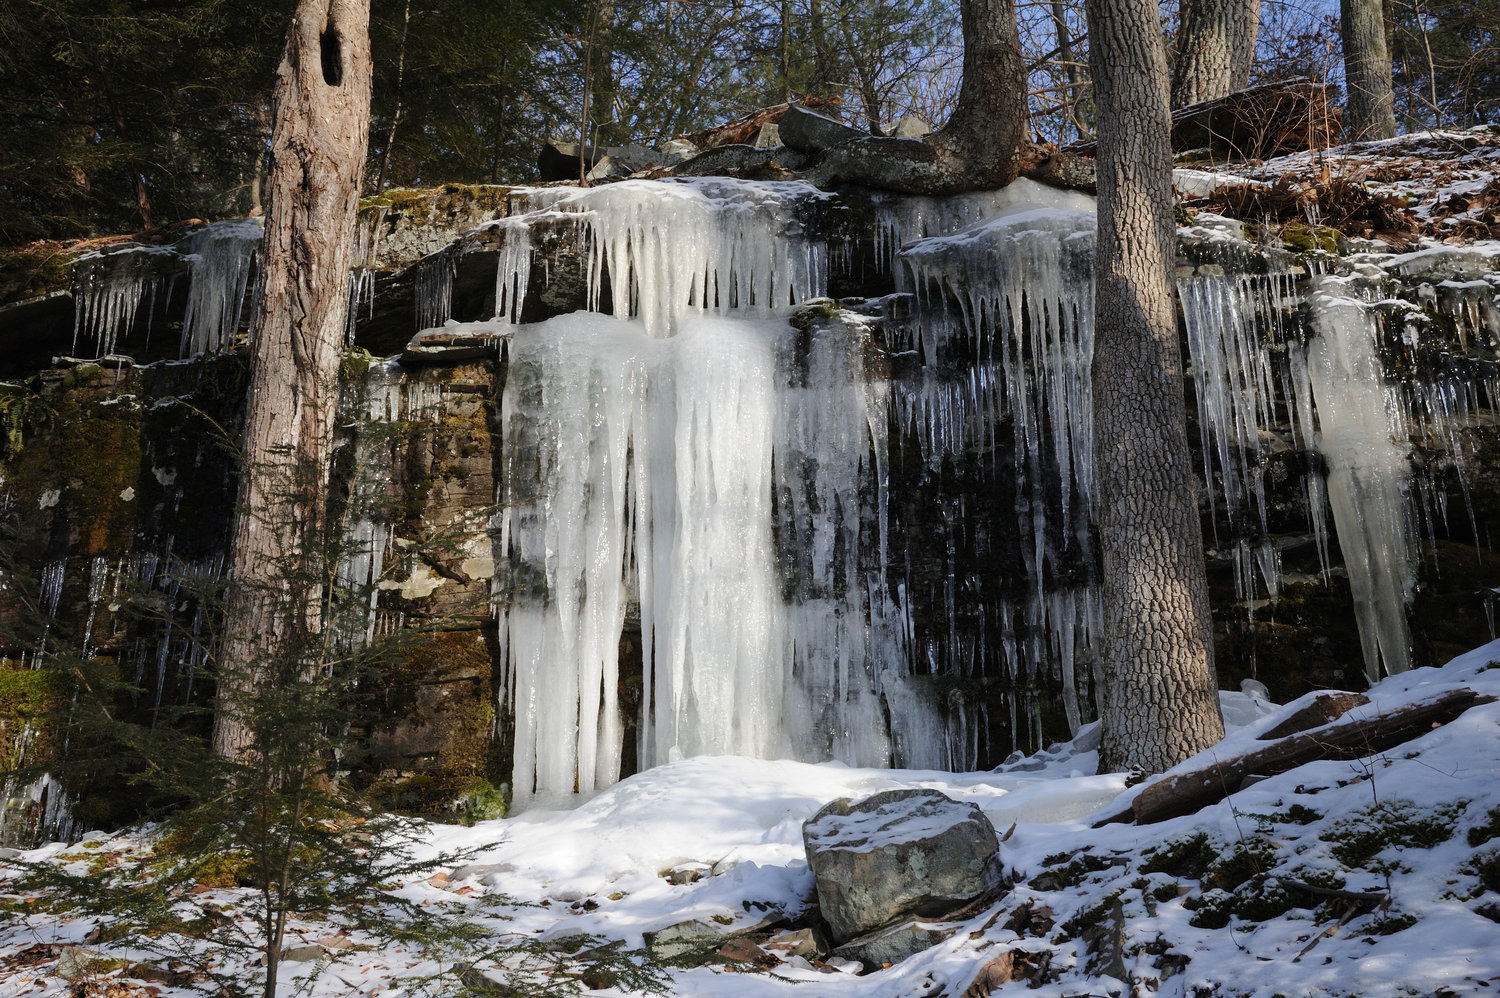 Outcrops that have small springs or seeps during the warm weather are good areas to find frozen stalactites of water over the winter. Even a very low flow of water seeping from between rock layers is enough to make huge frozen columns if it stays cold long enough.